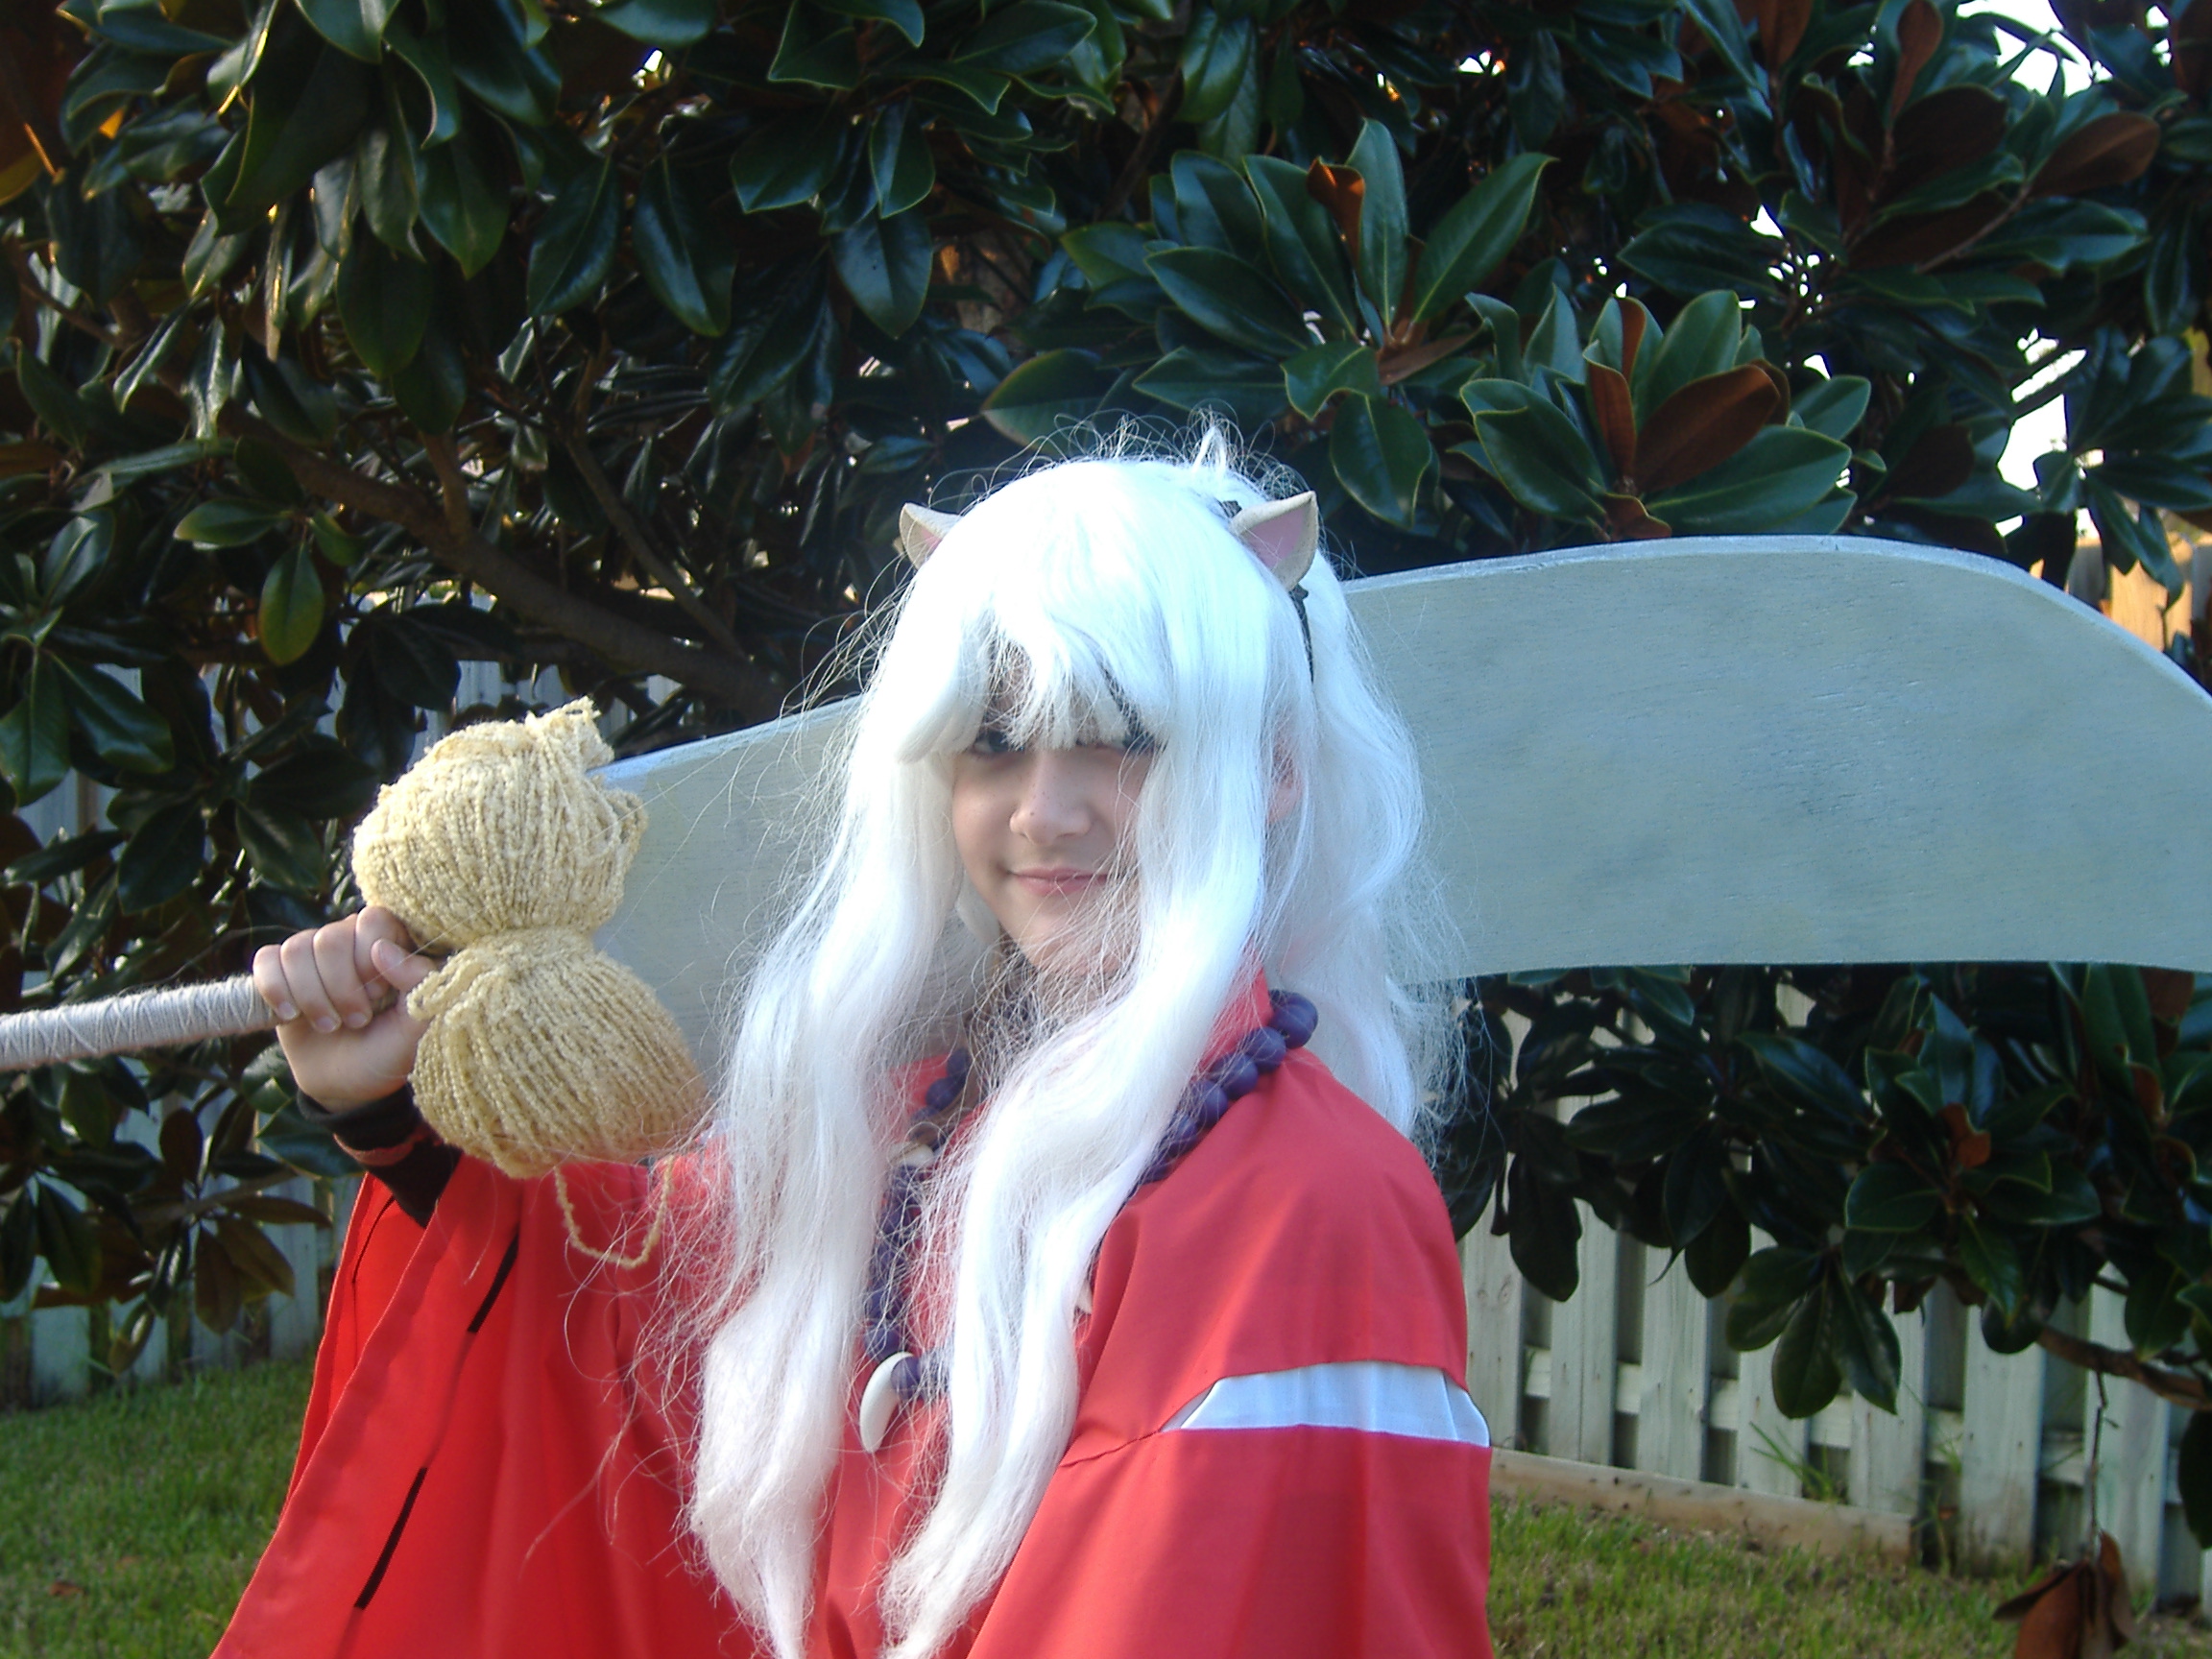 who sed inuyasha was an just an anime2? by inuyasha902105454